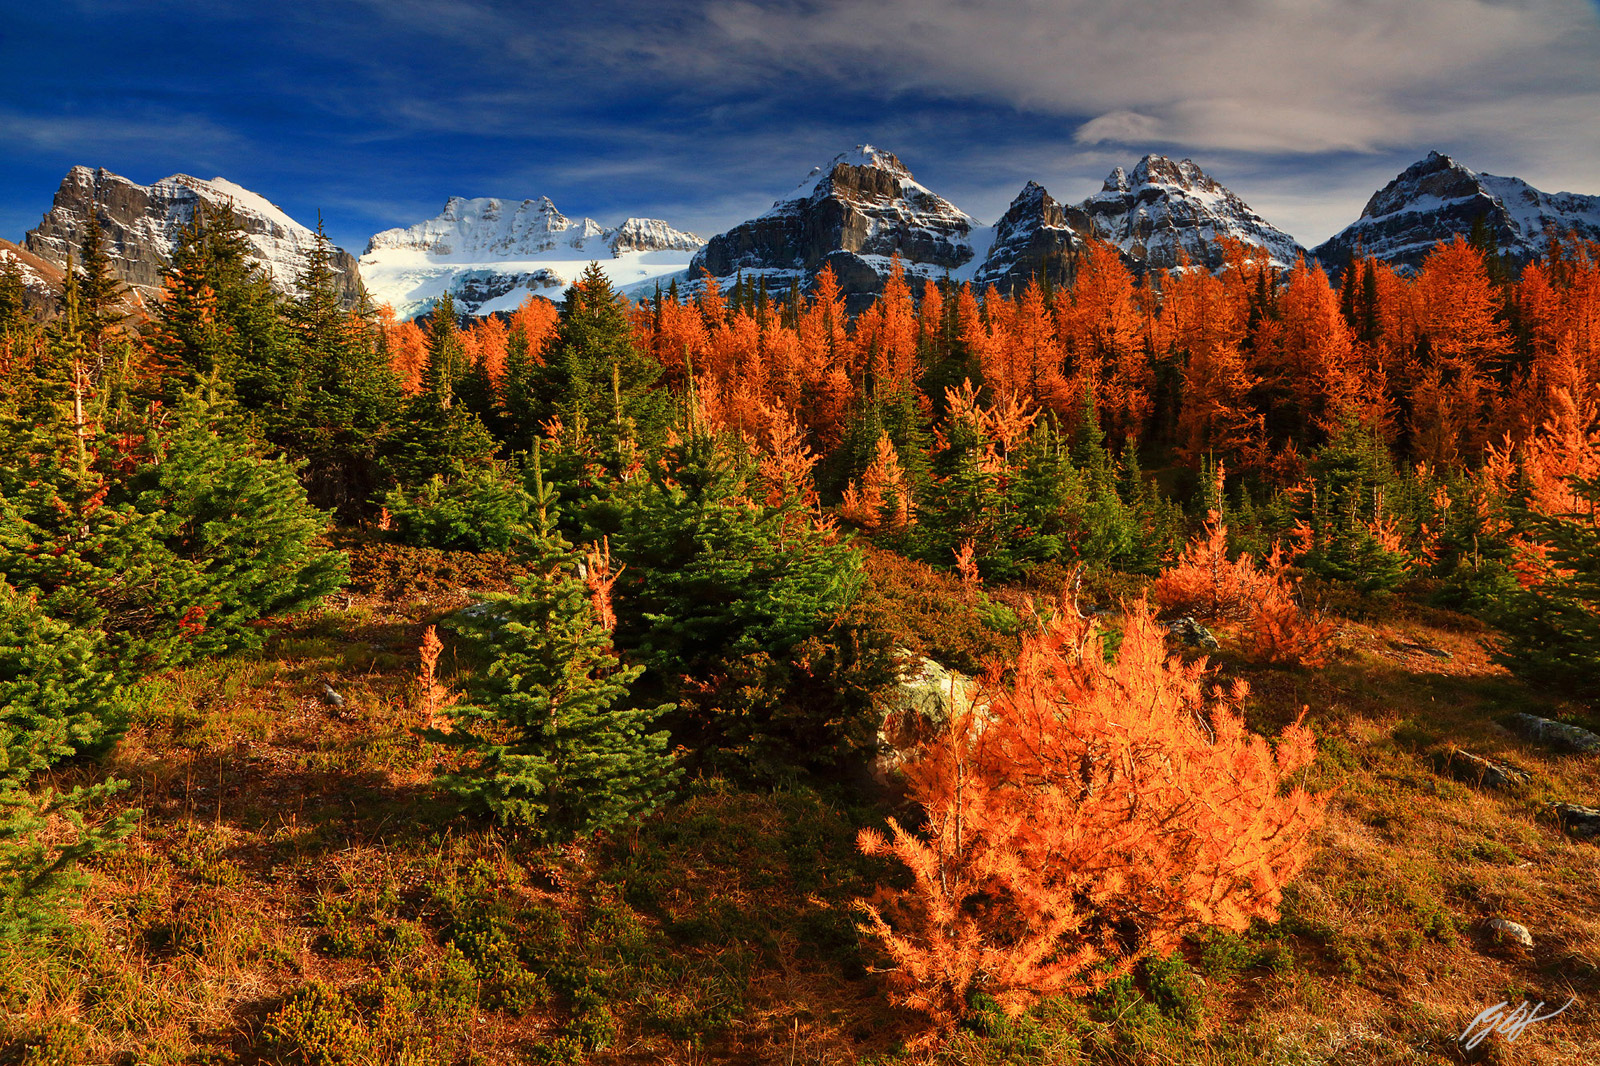 Golden Larch and the Ten Peaks in Banff National Park in Canada